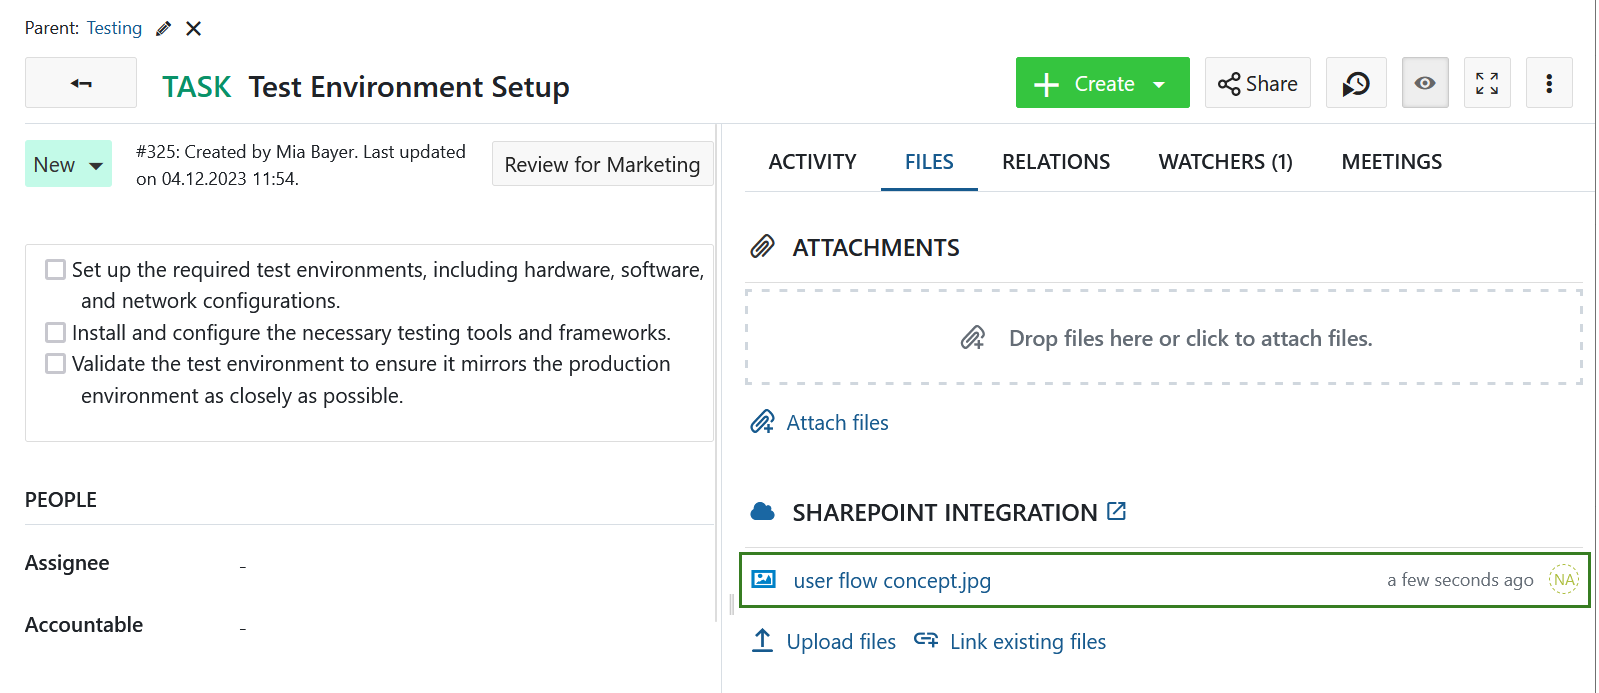 File successfully uploaded to Sharepoint storage